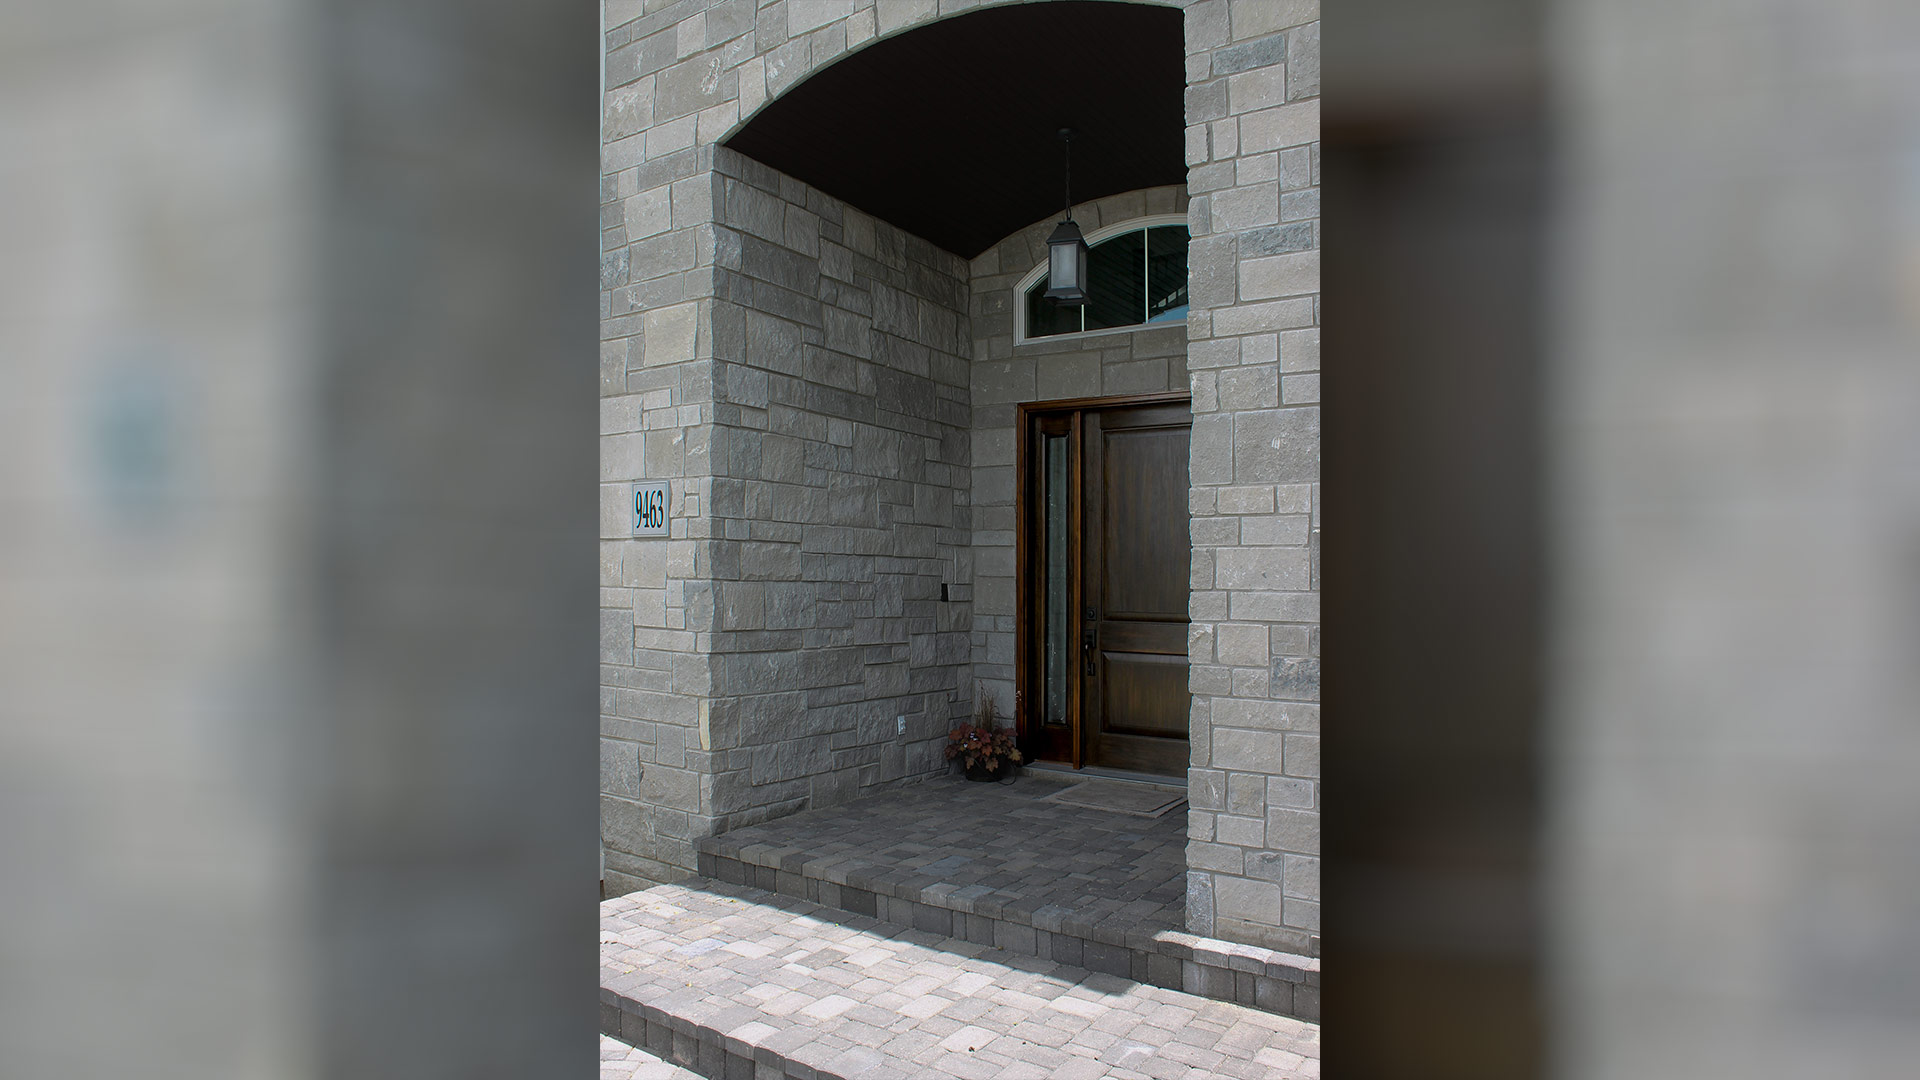 Mission Blue Traditional natural stone thin veneer installed on exterior of custom home.